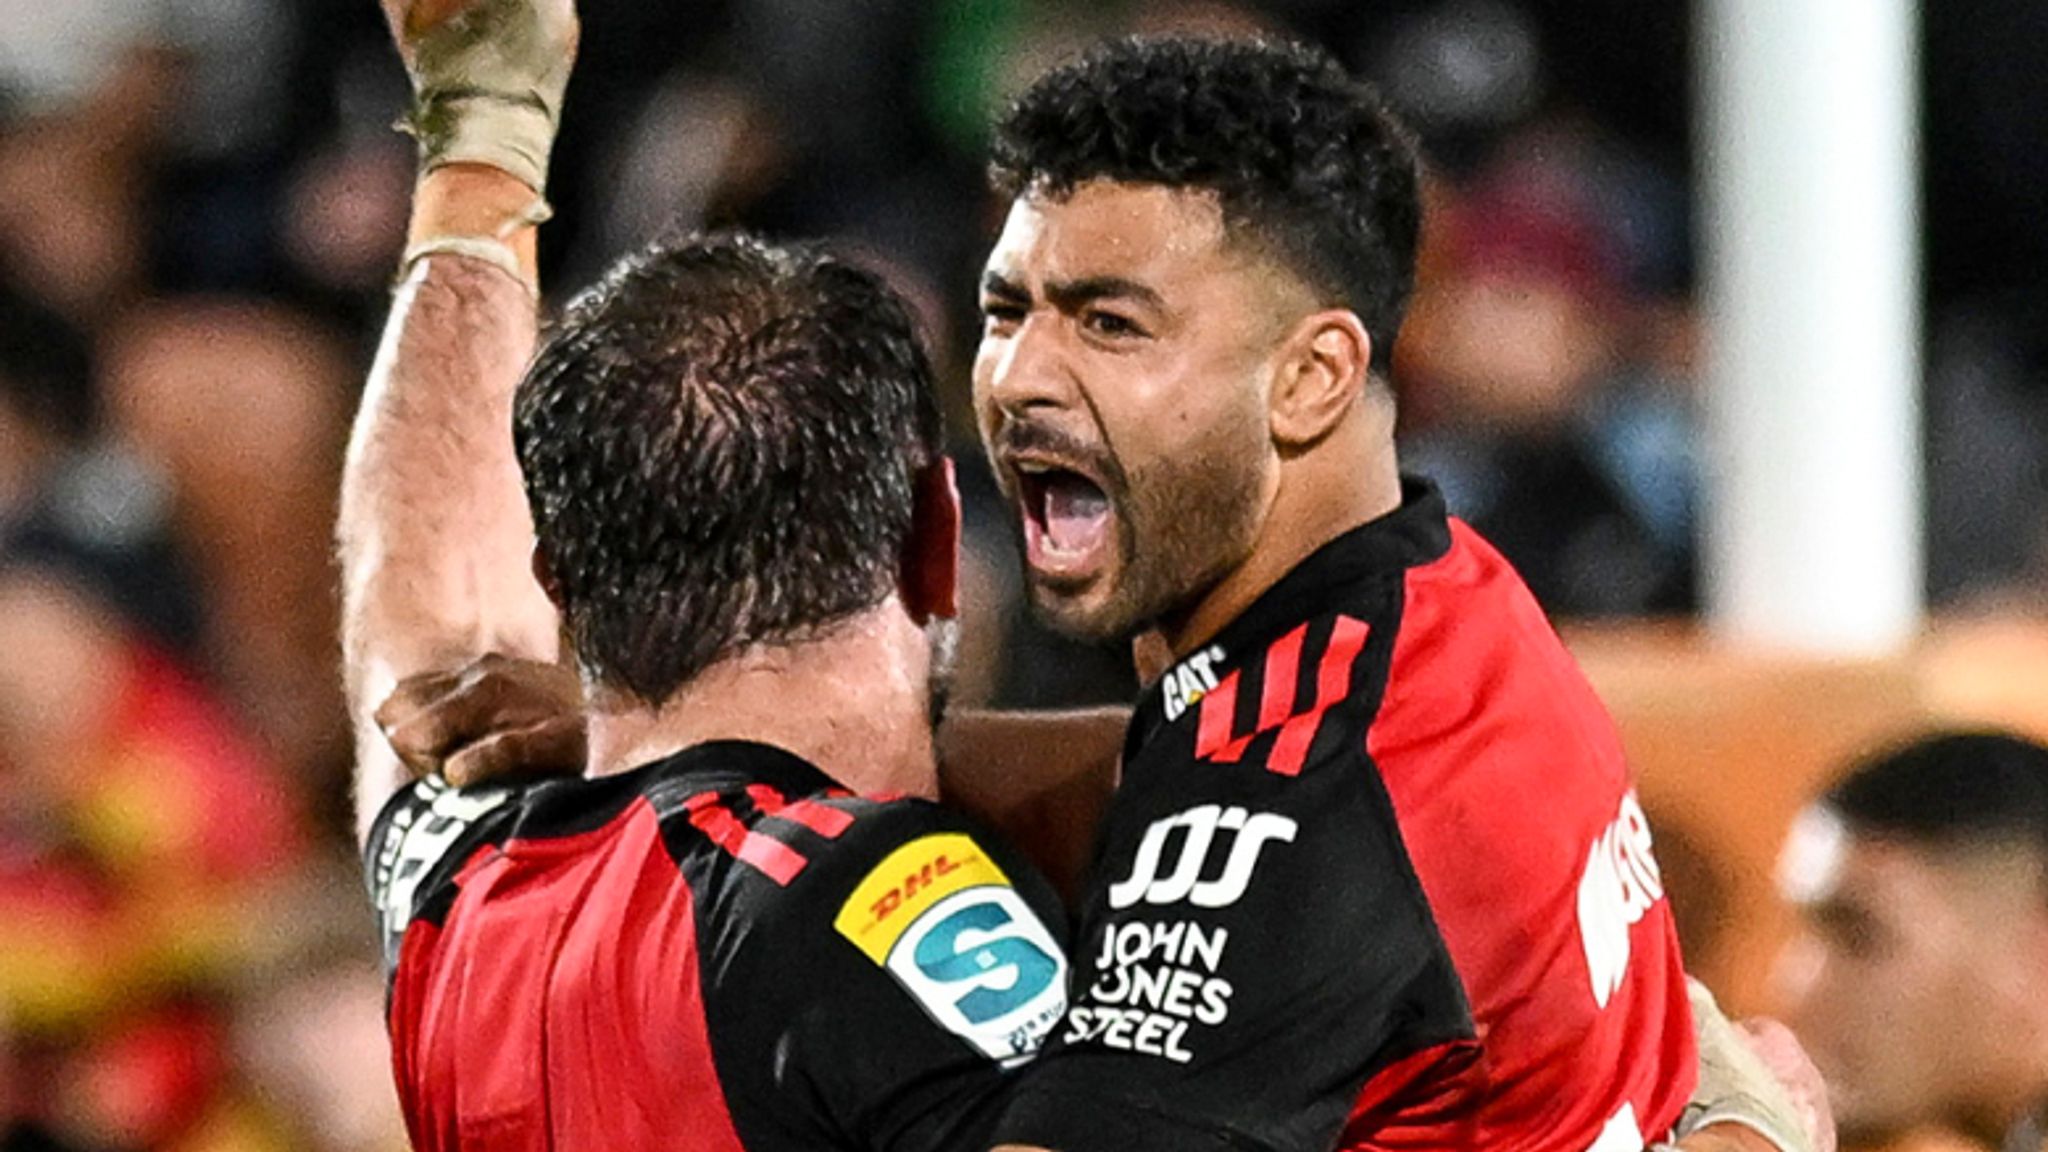 Super Rugby Pacific final Crusaders claim 25-20 victory over Chiefs to win seventh straight title Rugby Union News Sky Sports